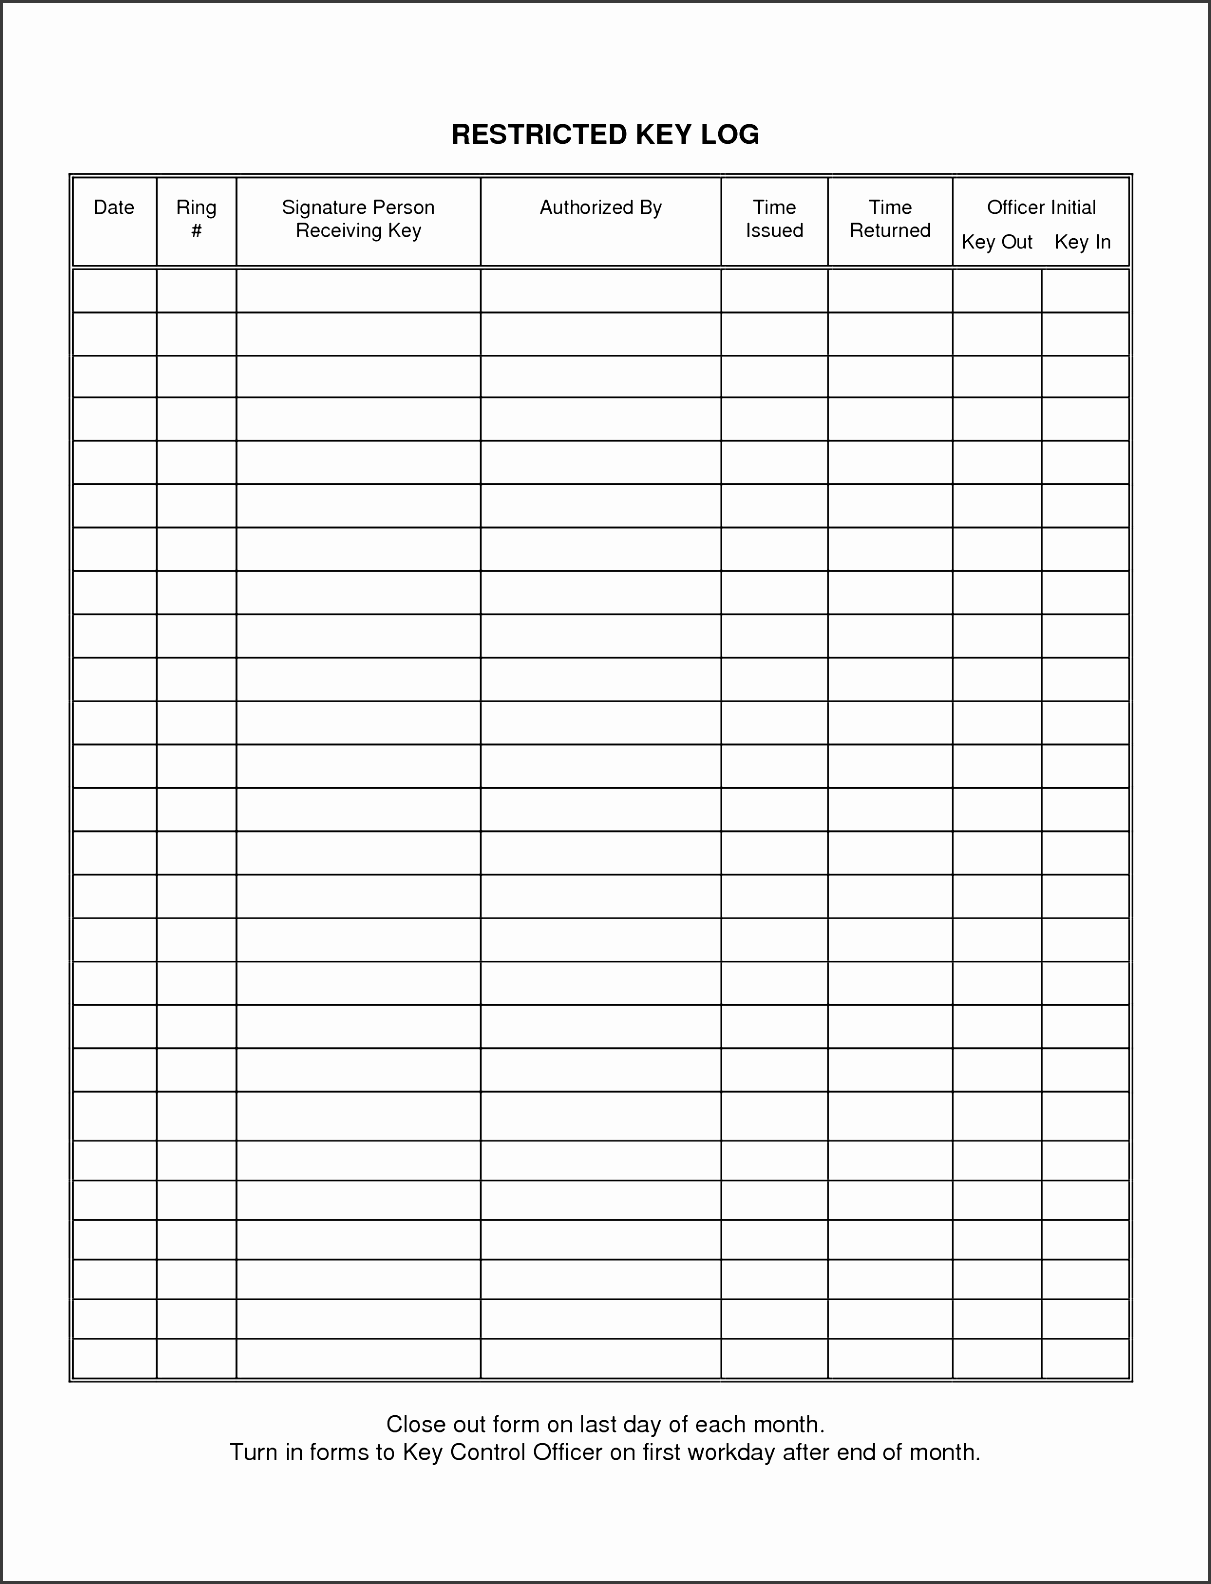 doc personal data form template business profit and loss unusual key